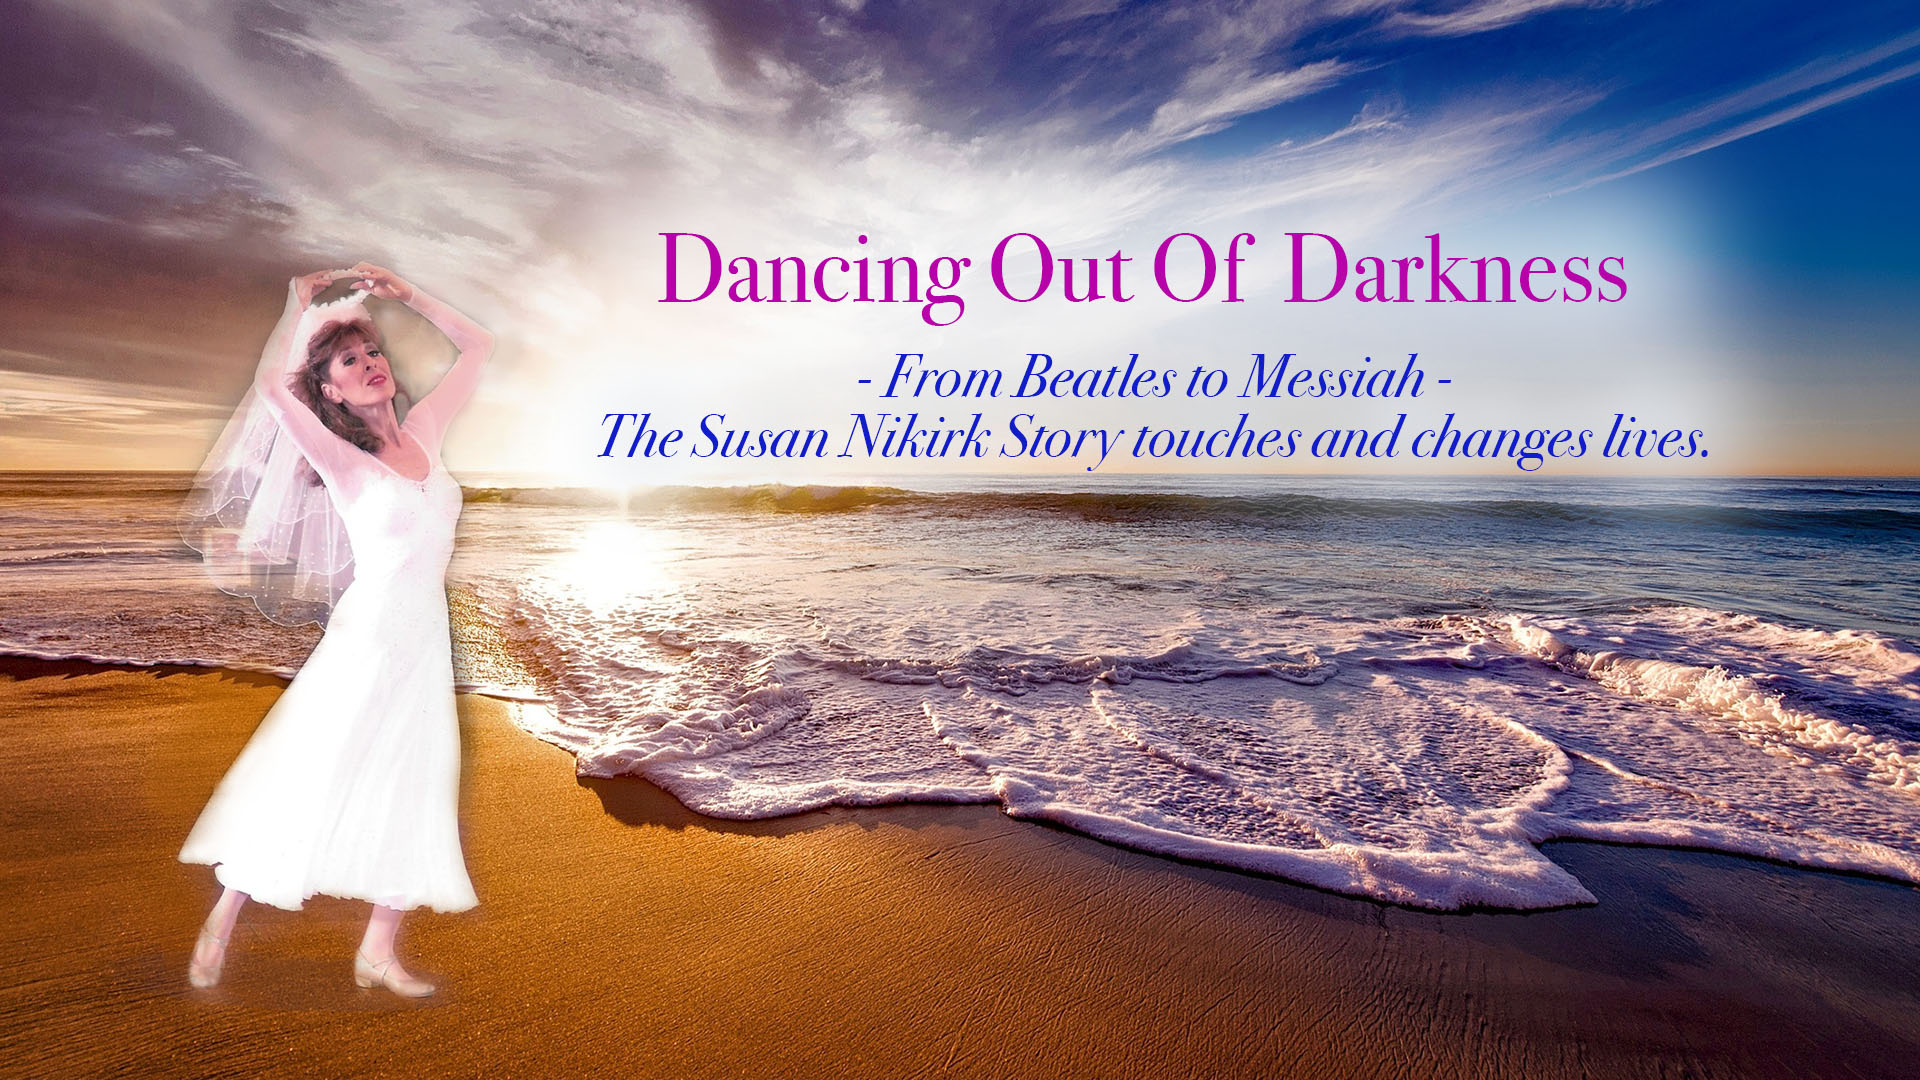 Dancing out of darkness